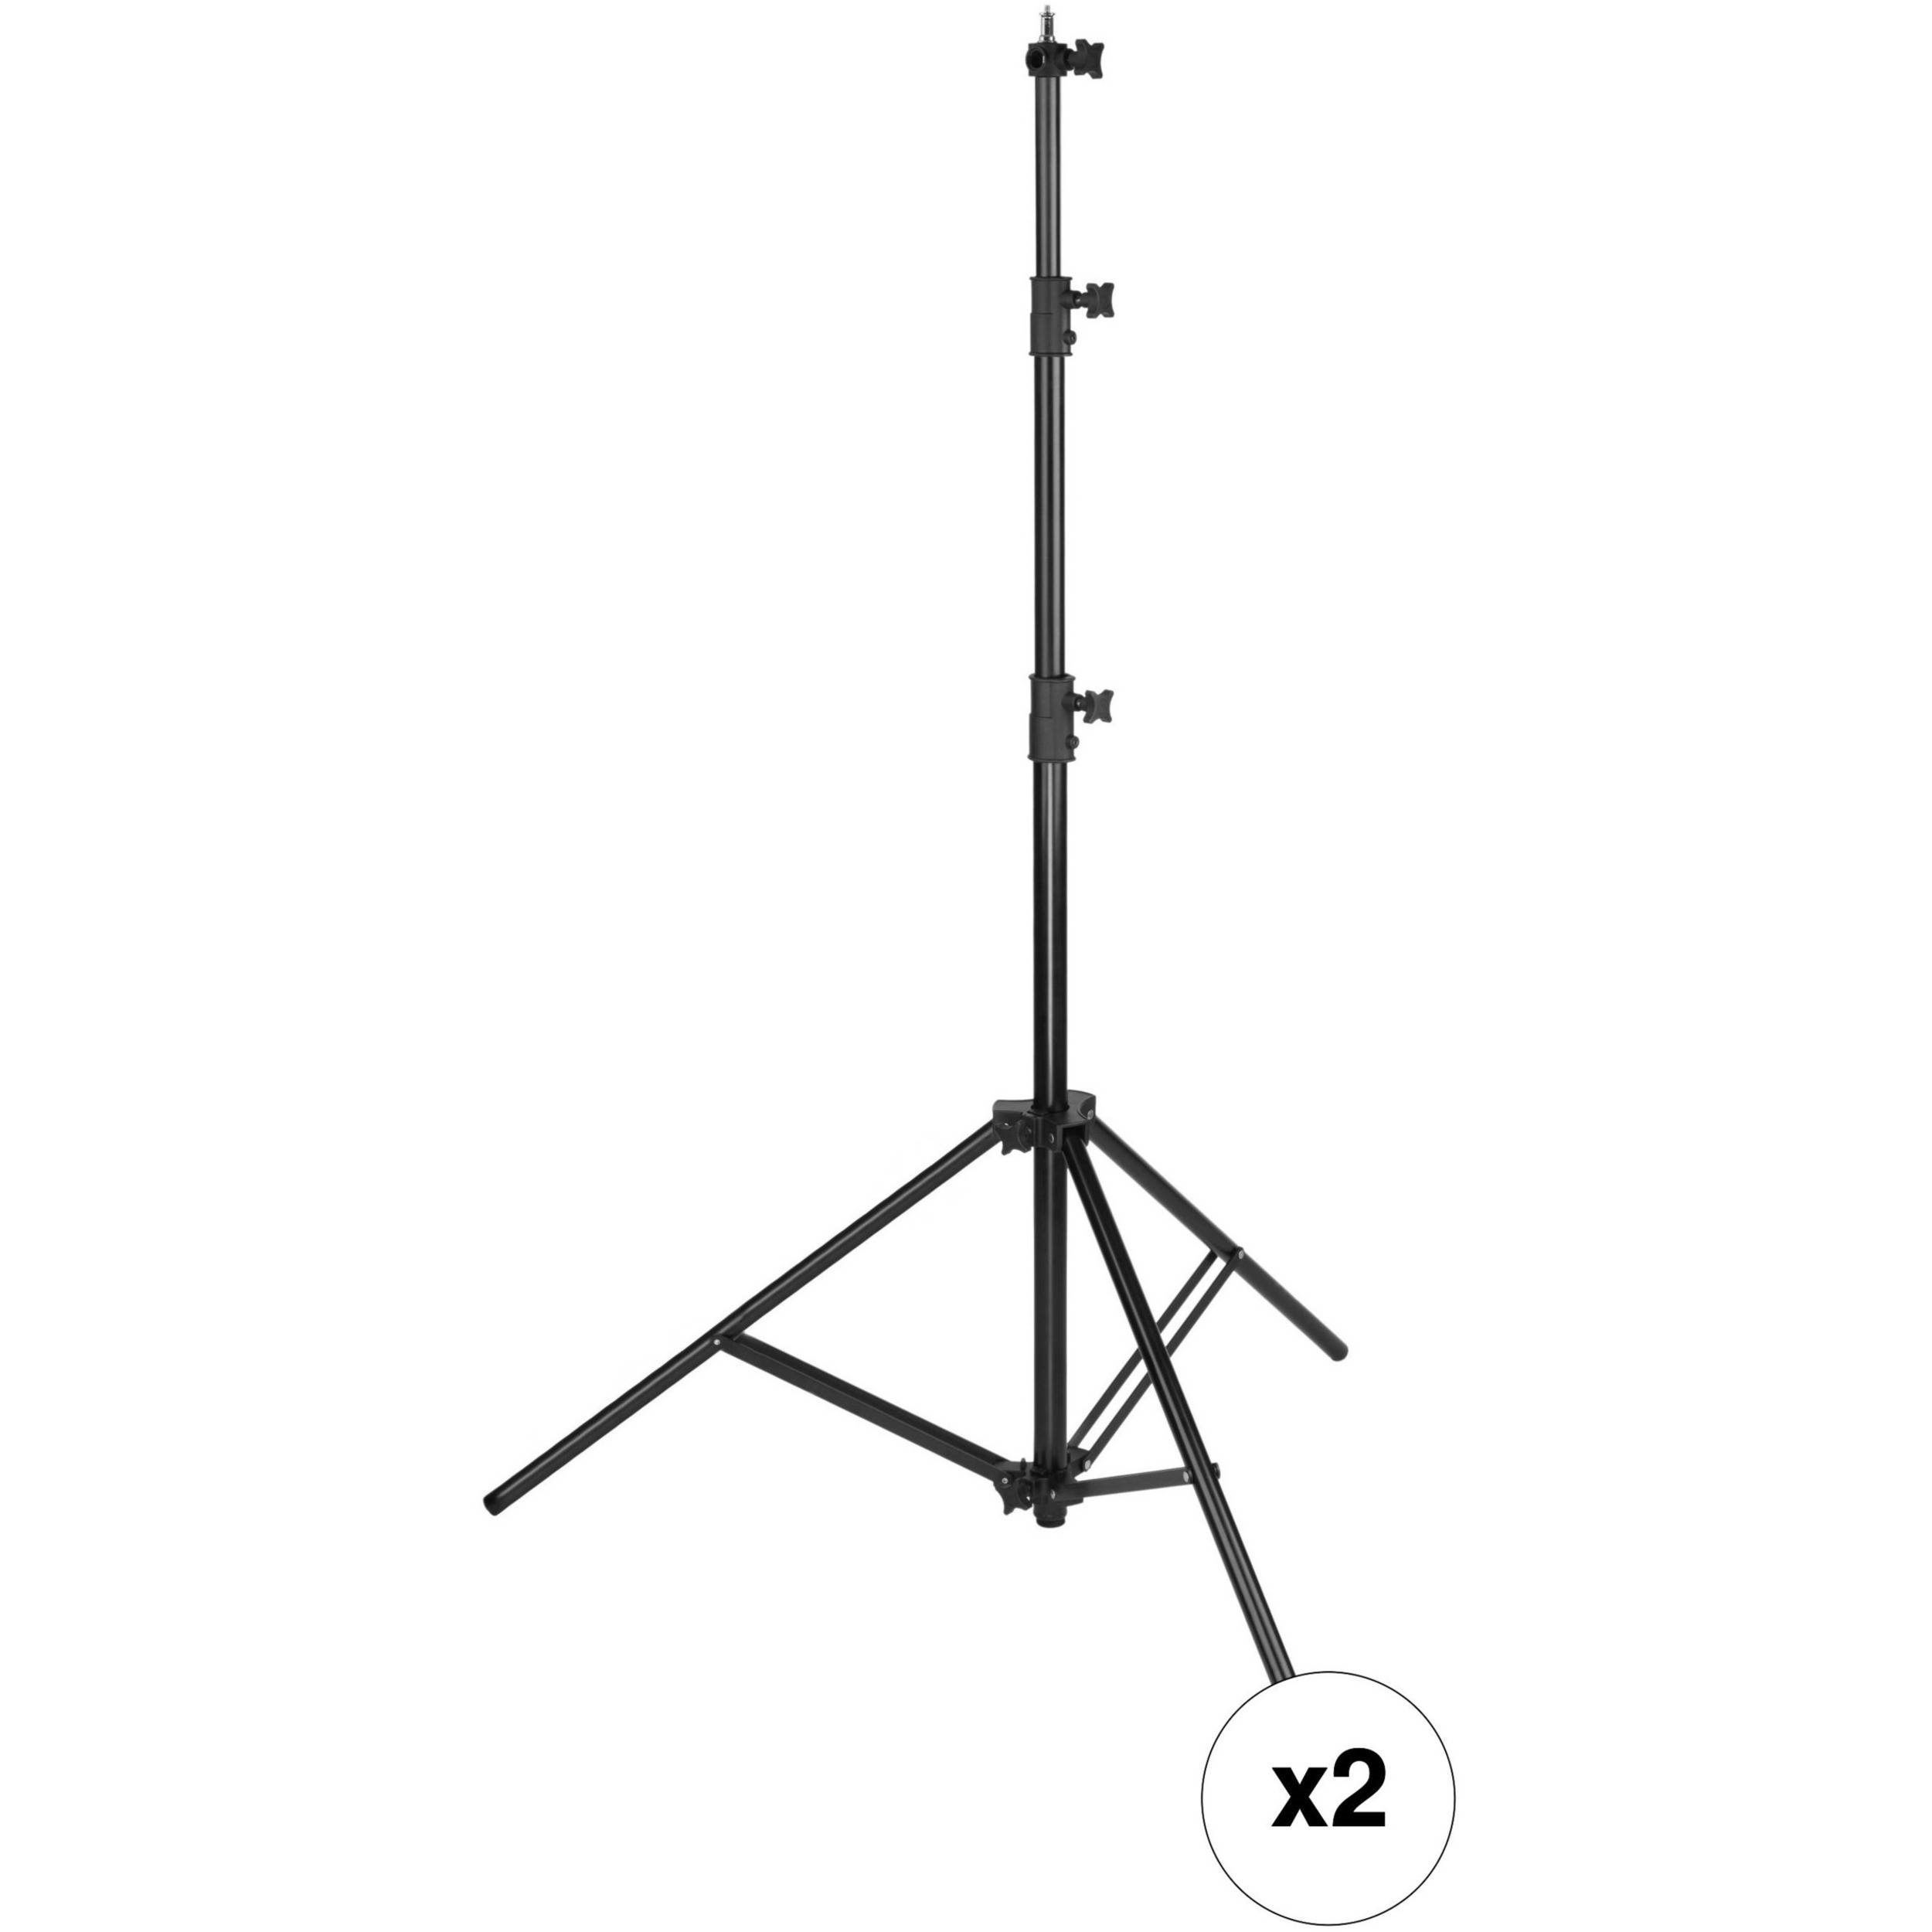 Impact Heavy-Duty Air-Cushioned Light Stand (9.5'/2.9m, Black - Set of 2)